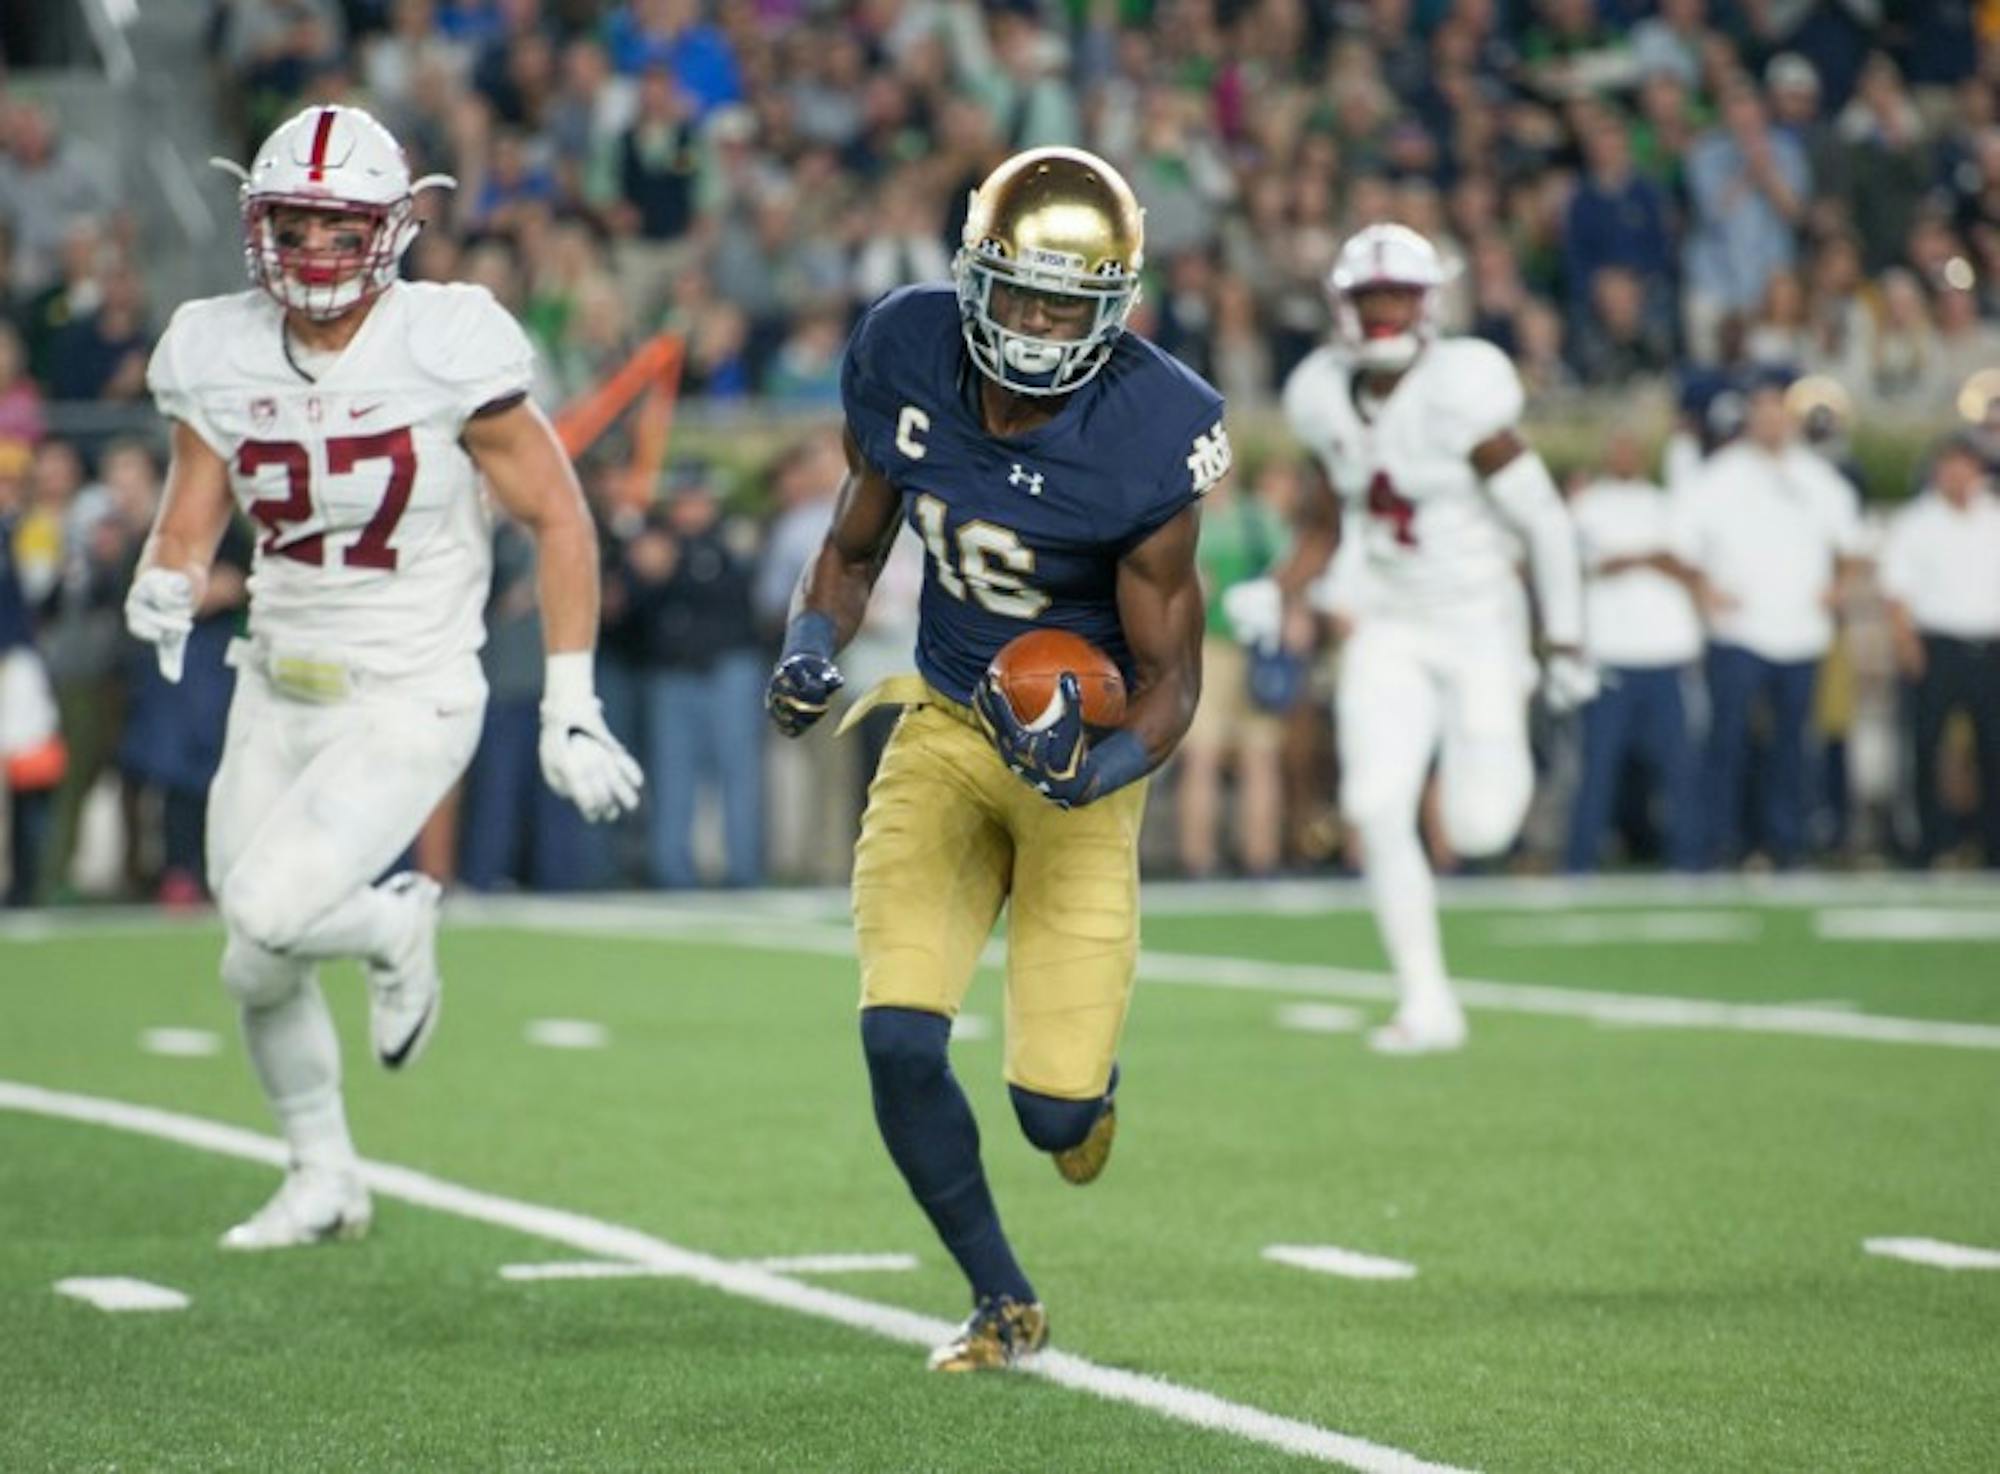 Irish senior receiver Torii Hunter Jr. looks to pick up more yards after a catch during Notre Dame’s 17-10 loss to Stanford on Oct. 15.